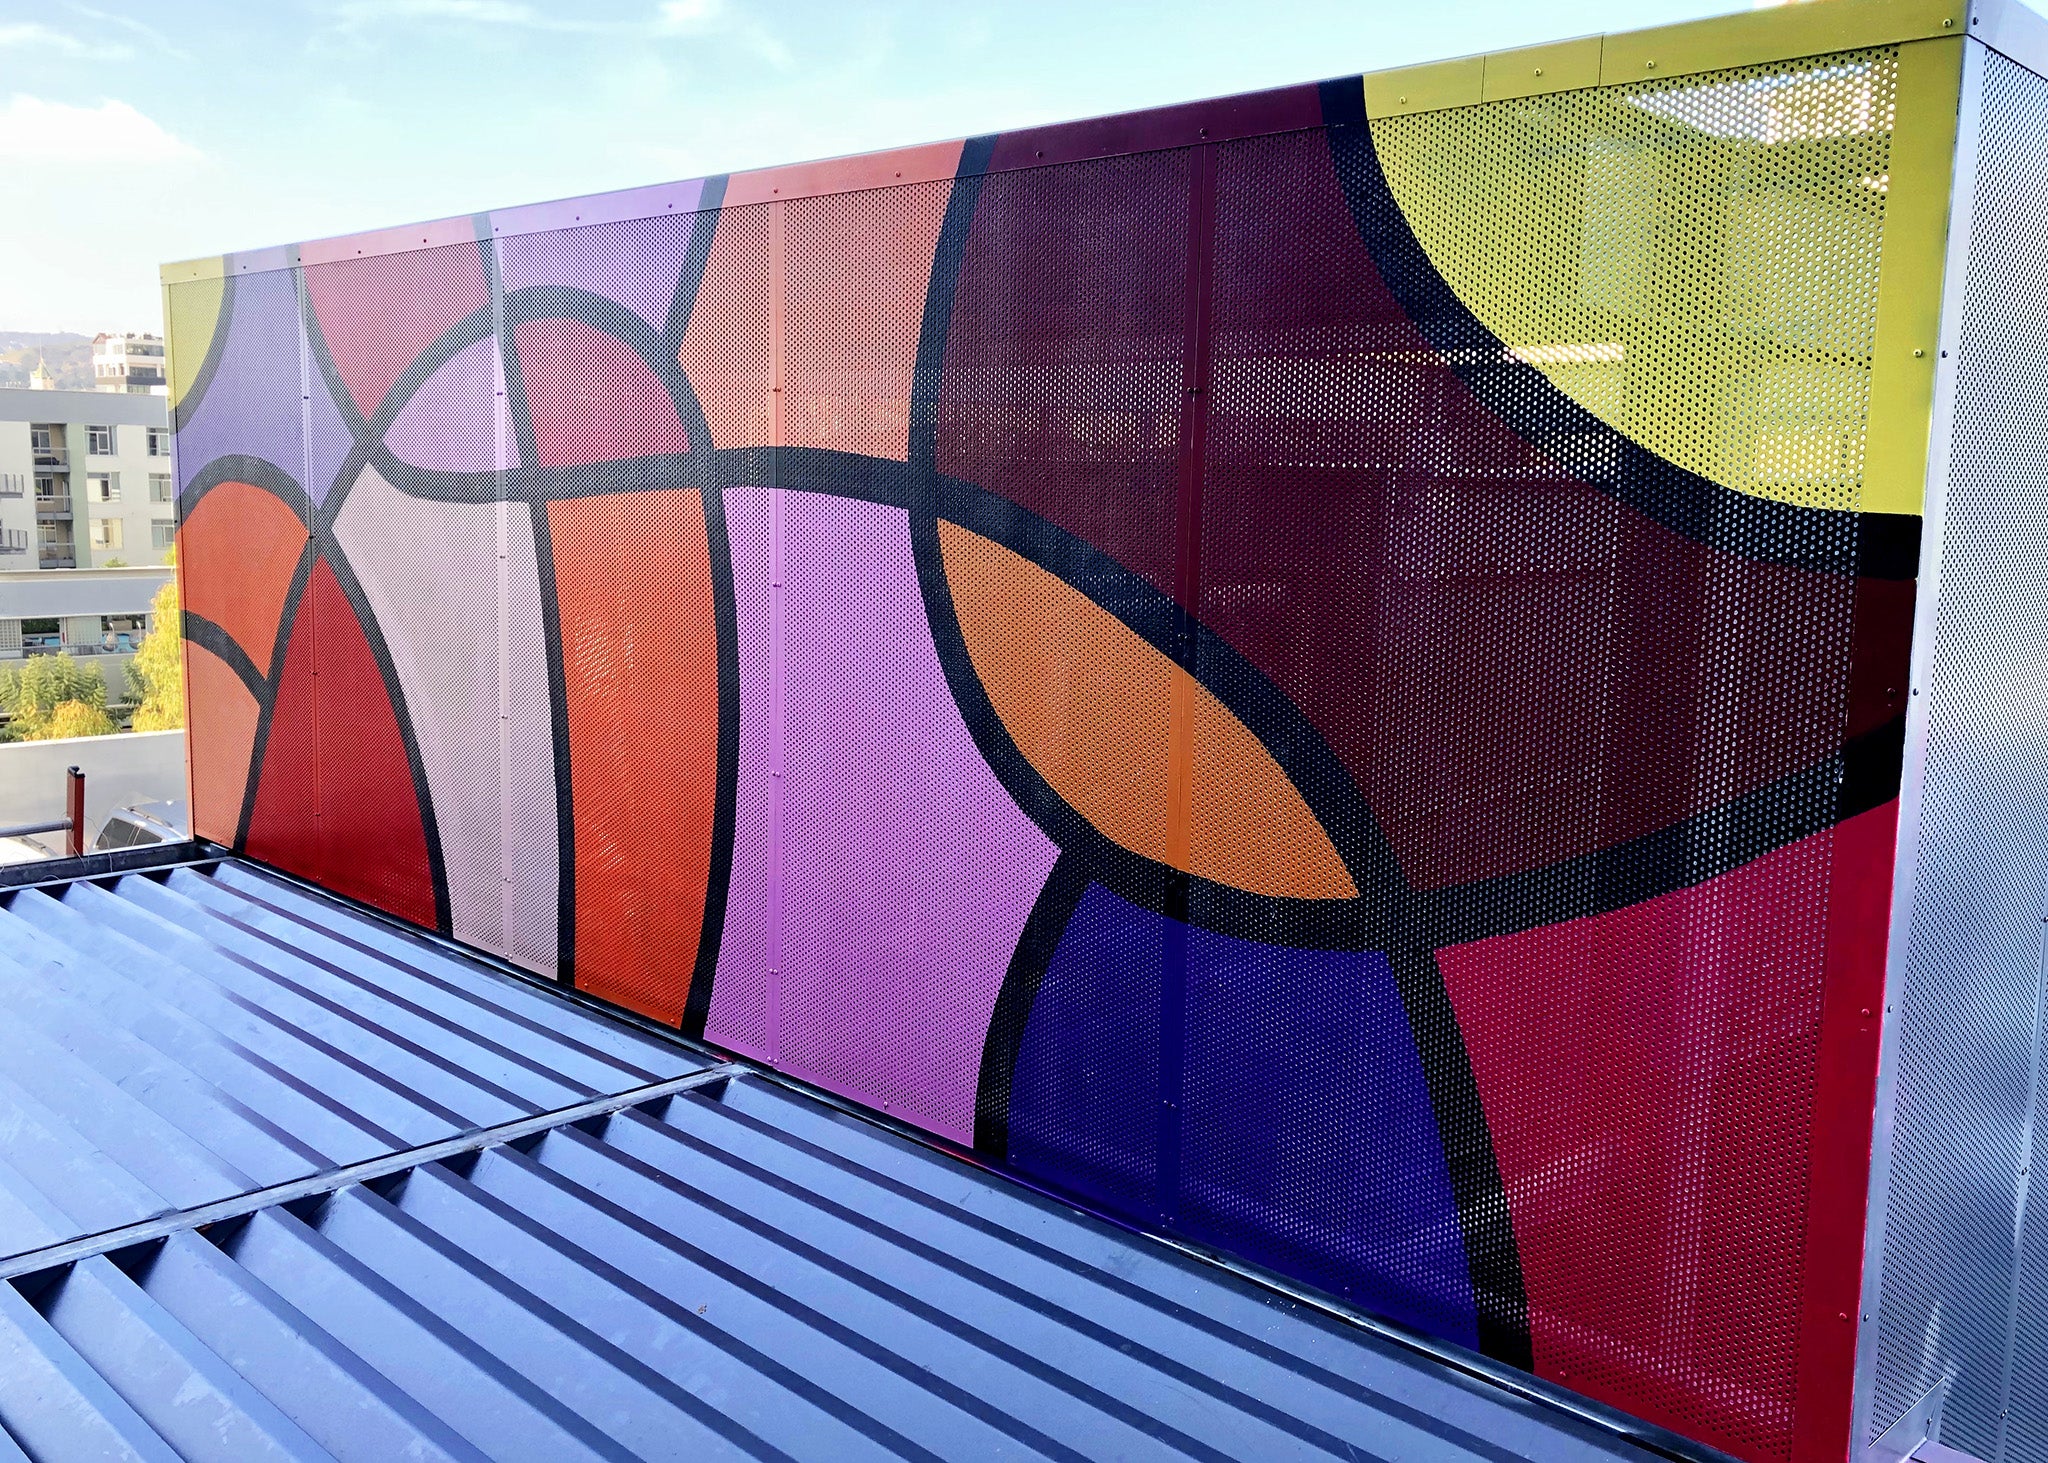 Artistic rooftop installation of an abstract mural with intertwined shapes in dynamic colors, adding a playful touch to the urban skyline.